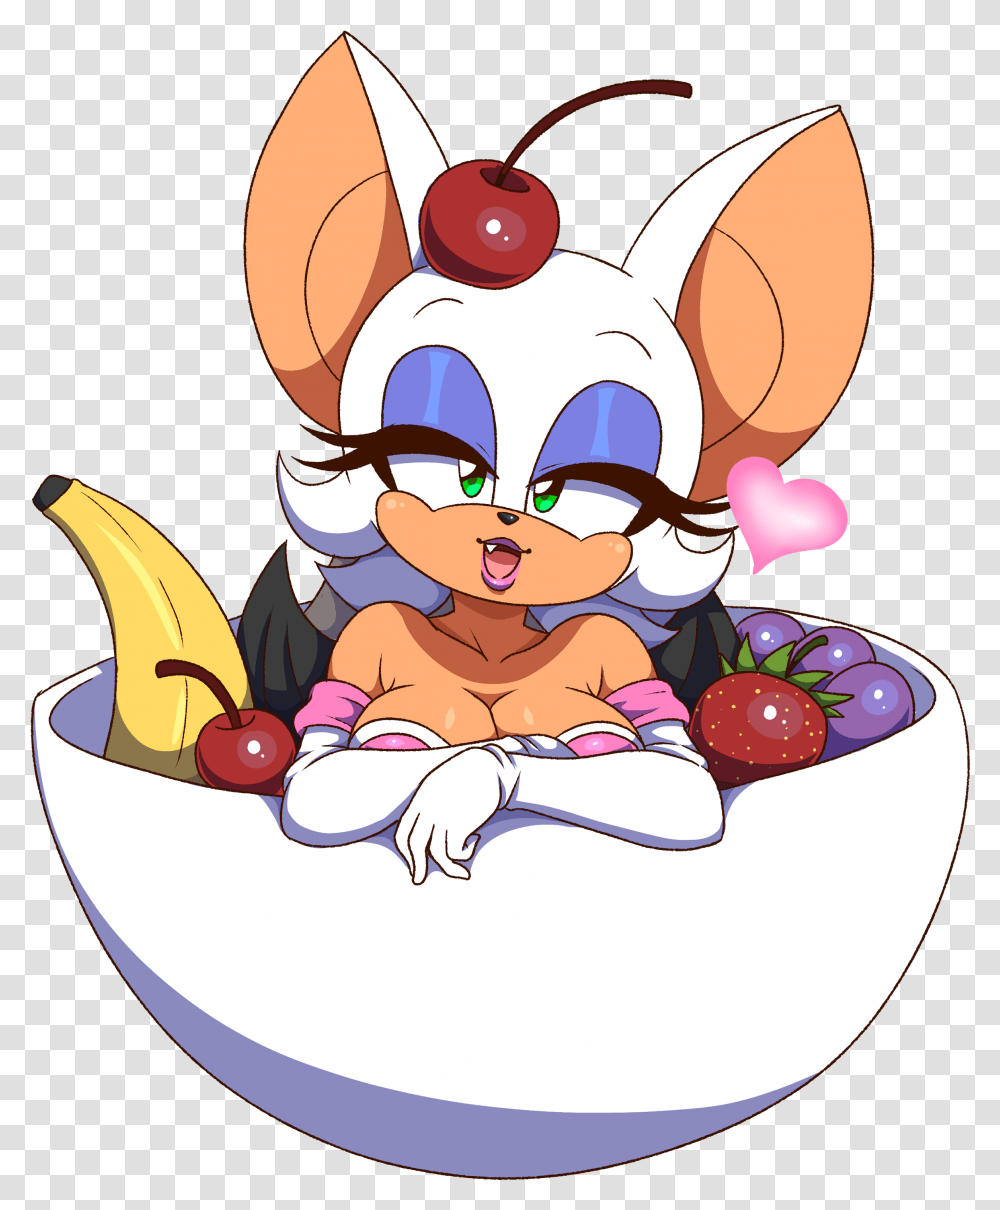 Rouge The Fruit Bat Sonic The Hedgehog, Sweets, Food, Performer, Birthday Cake Transparent Png